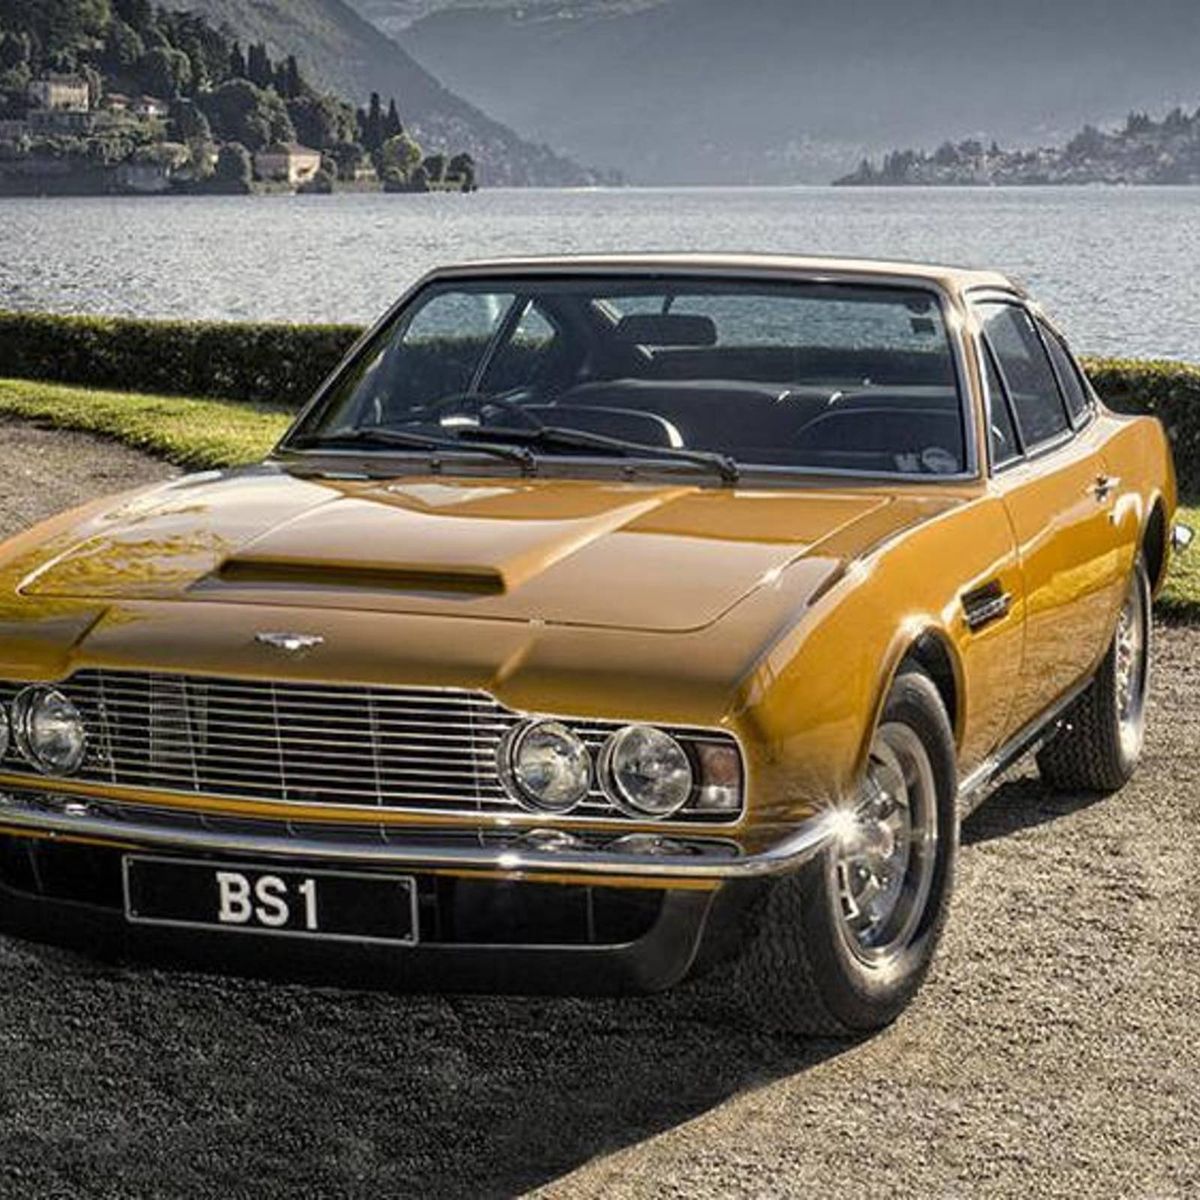 Aston Martin Dbs From 'The Persuaders!' Sets Record At Auction